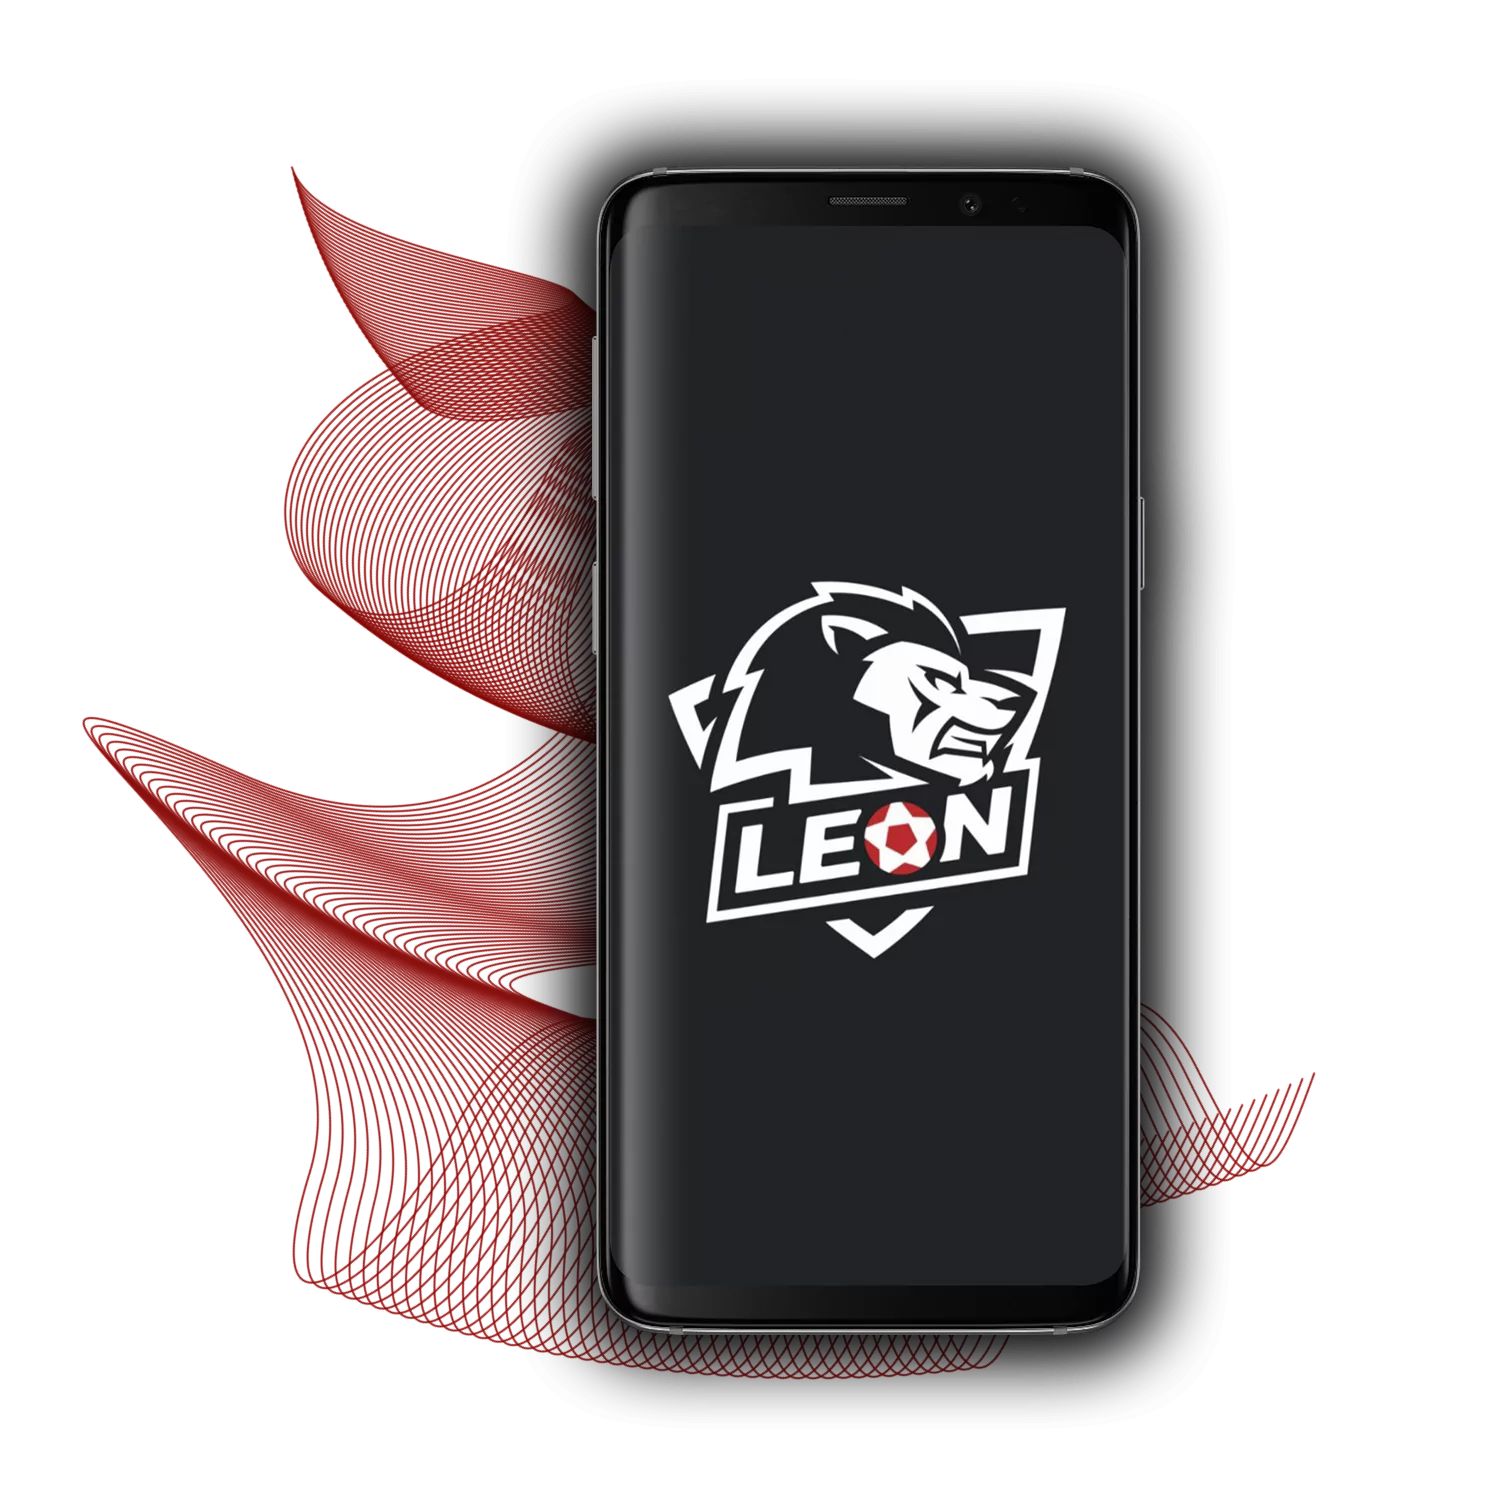 Download and install the Leon app for betting via your mobile phone.